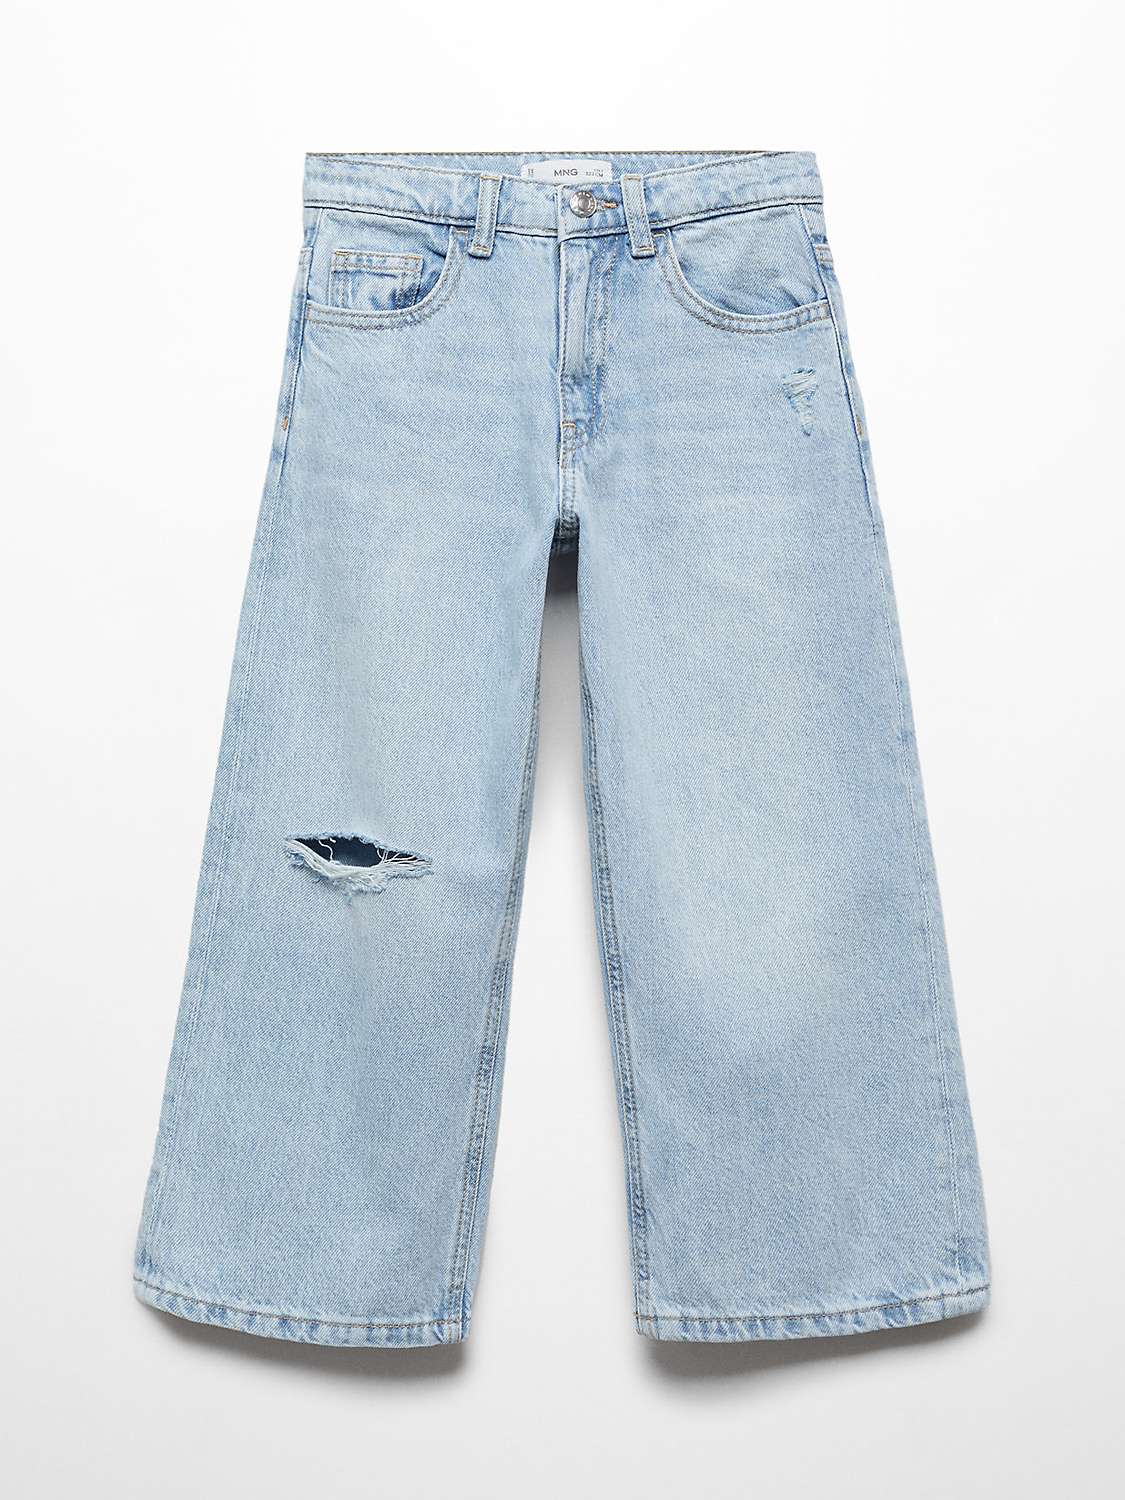 Buy Mango Kids' Ripped Culotte Jeans, Open Blue Online at johnlewis.com